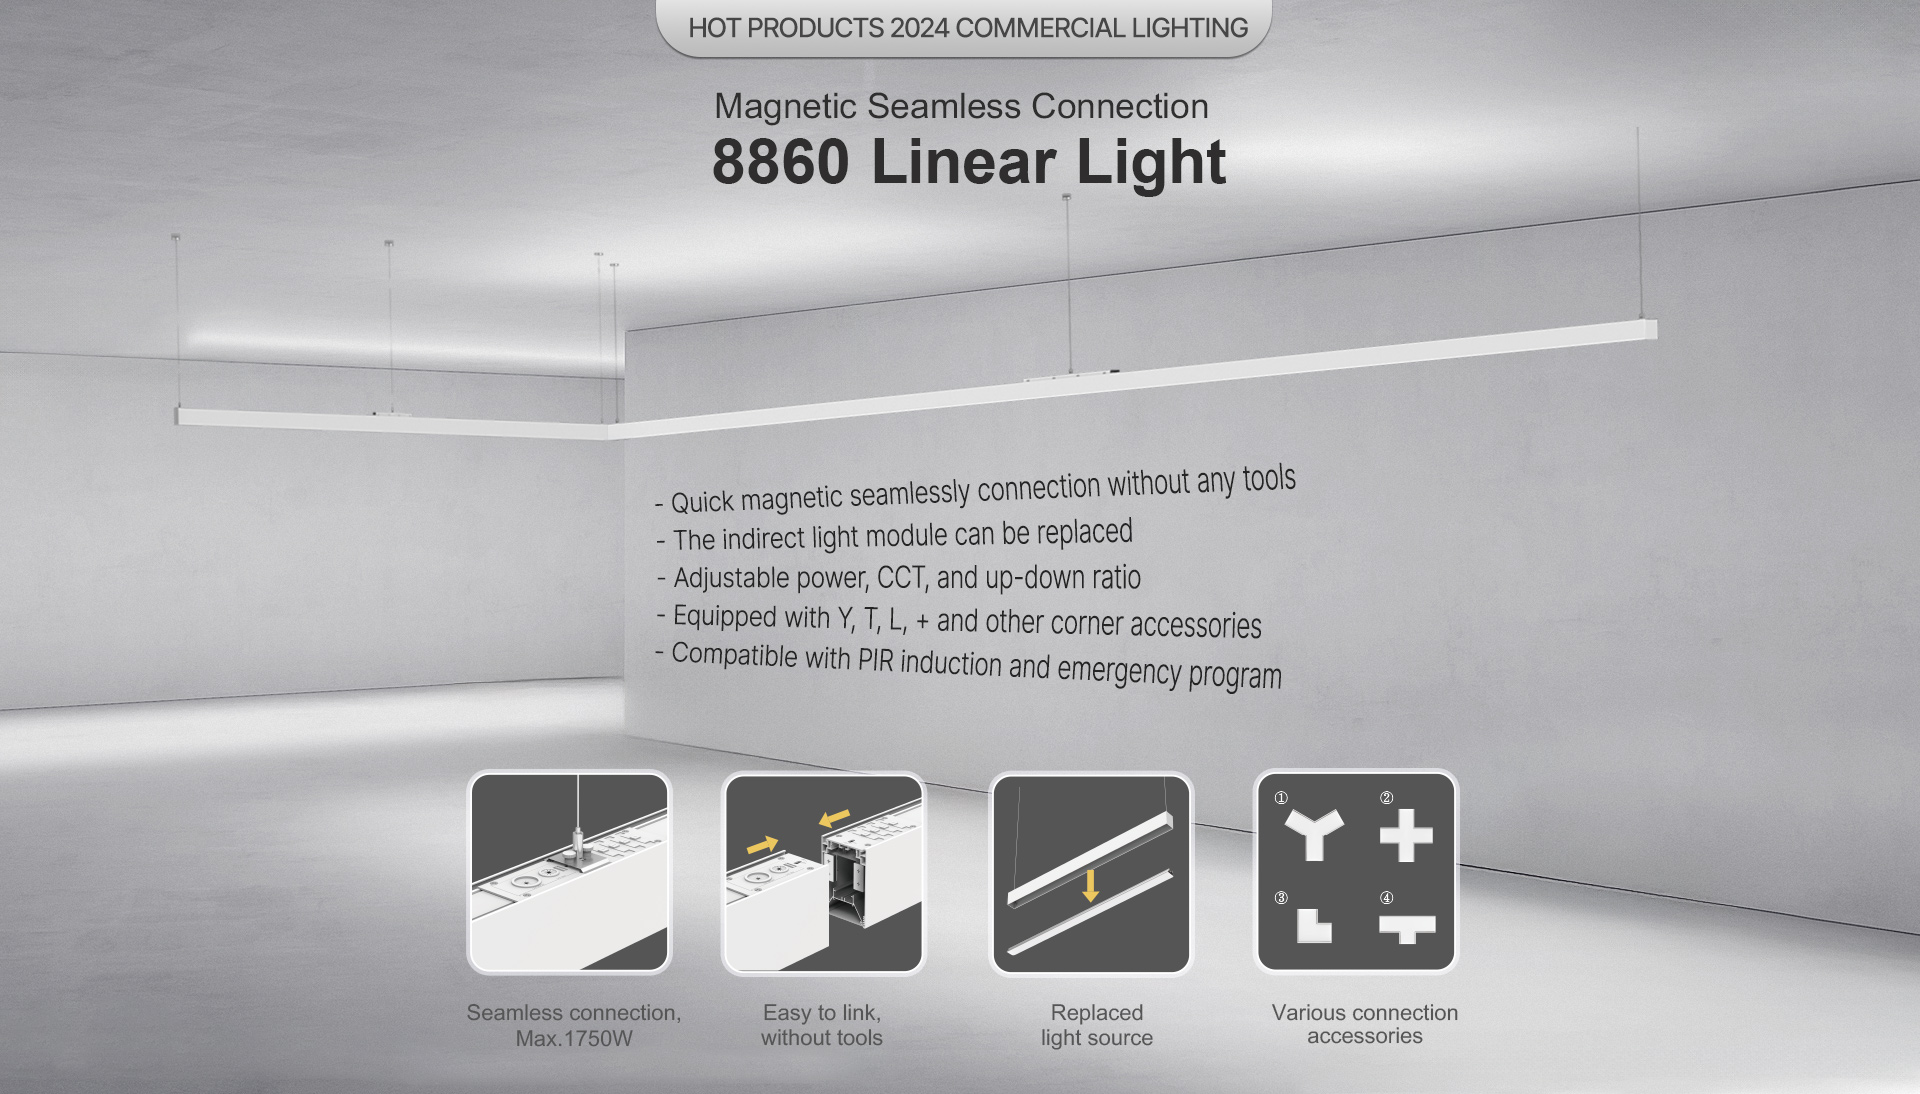 Magnetic_Seamless_Connection_8860_linear_light.jpg